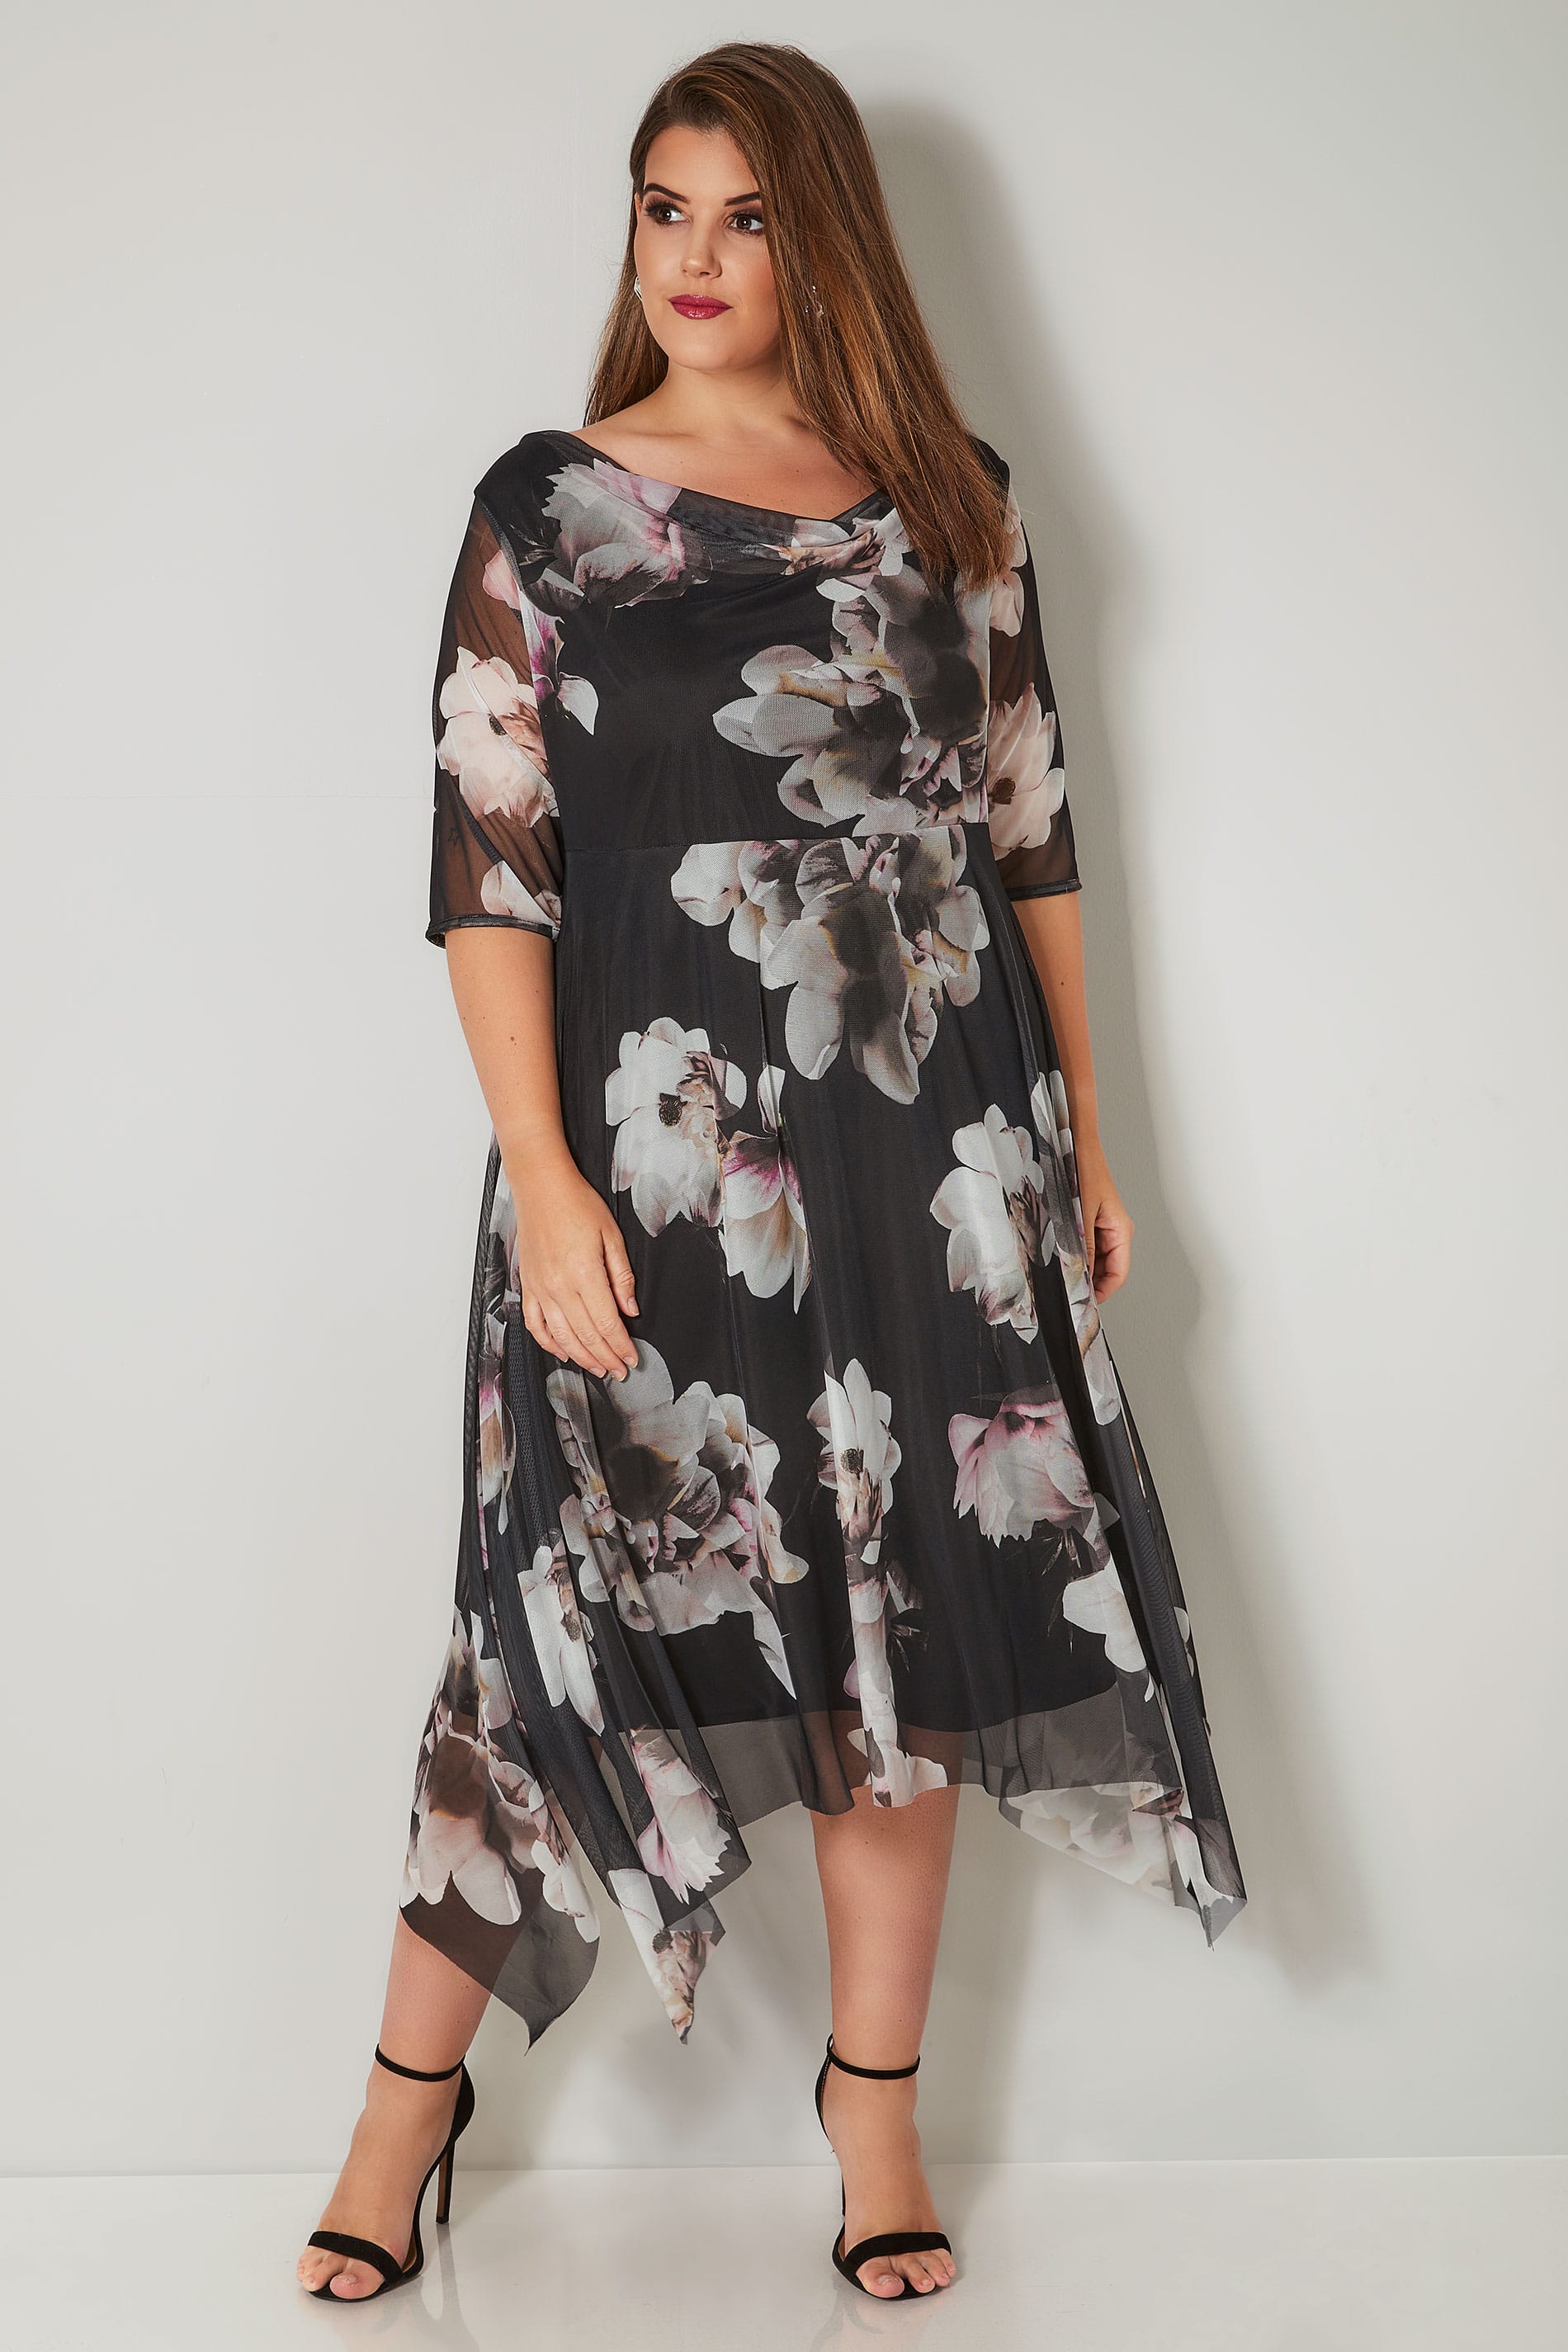 YOURS LONDON Black & Cream Floral Mesh Dress With Cowl